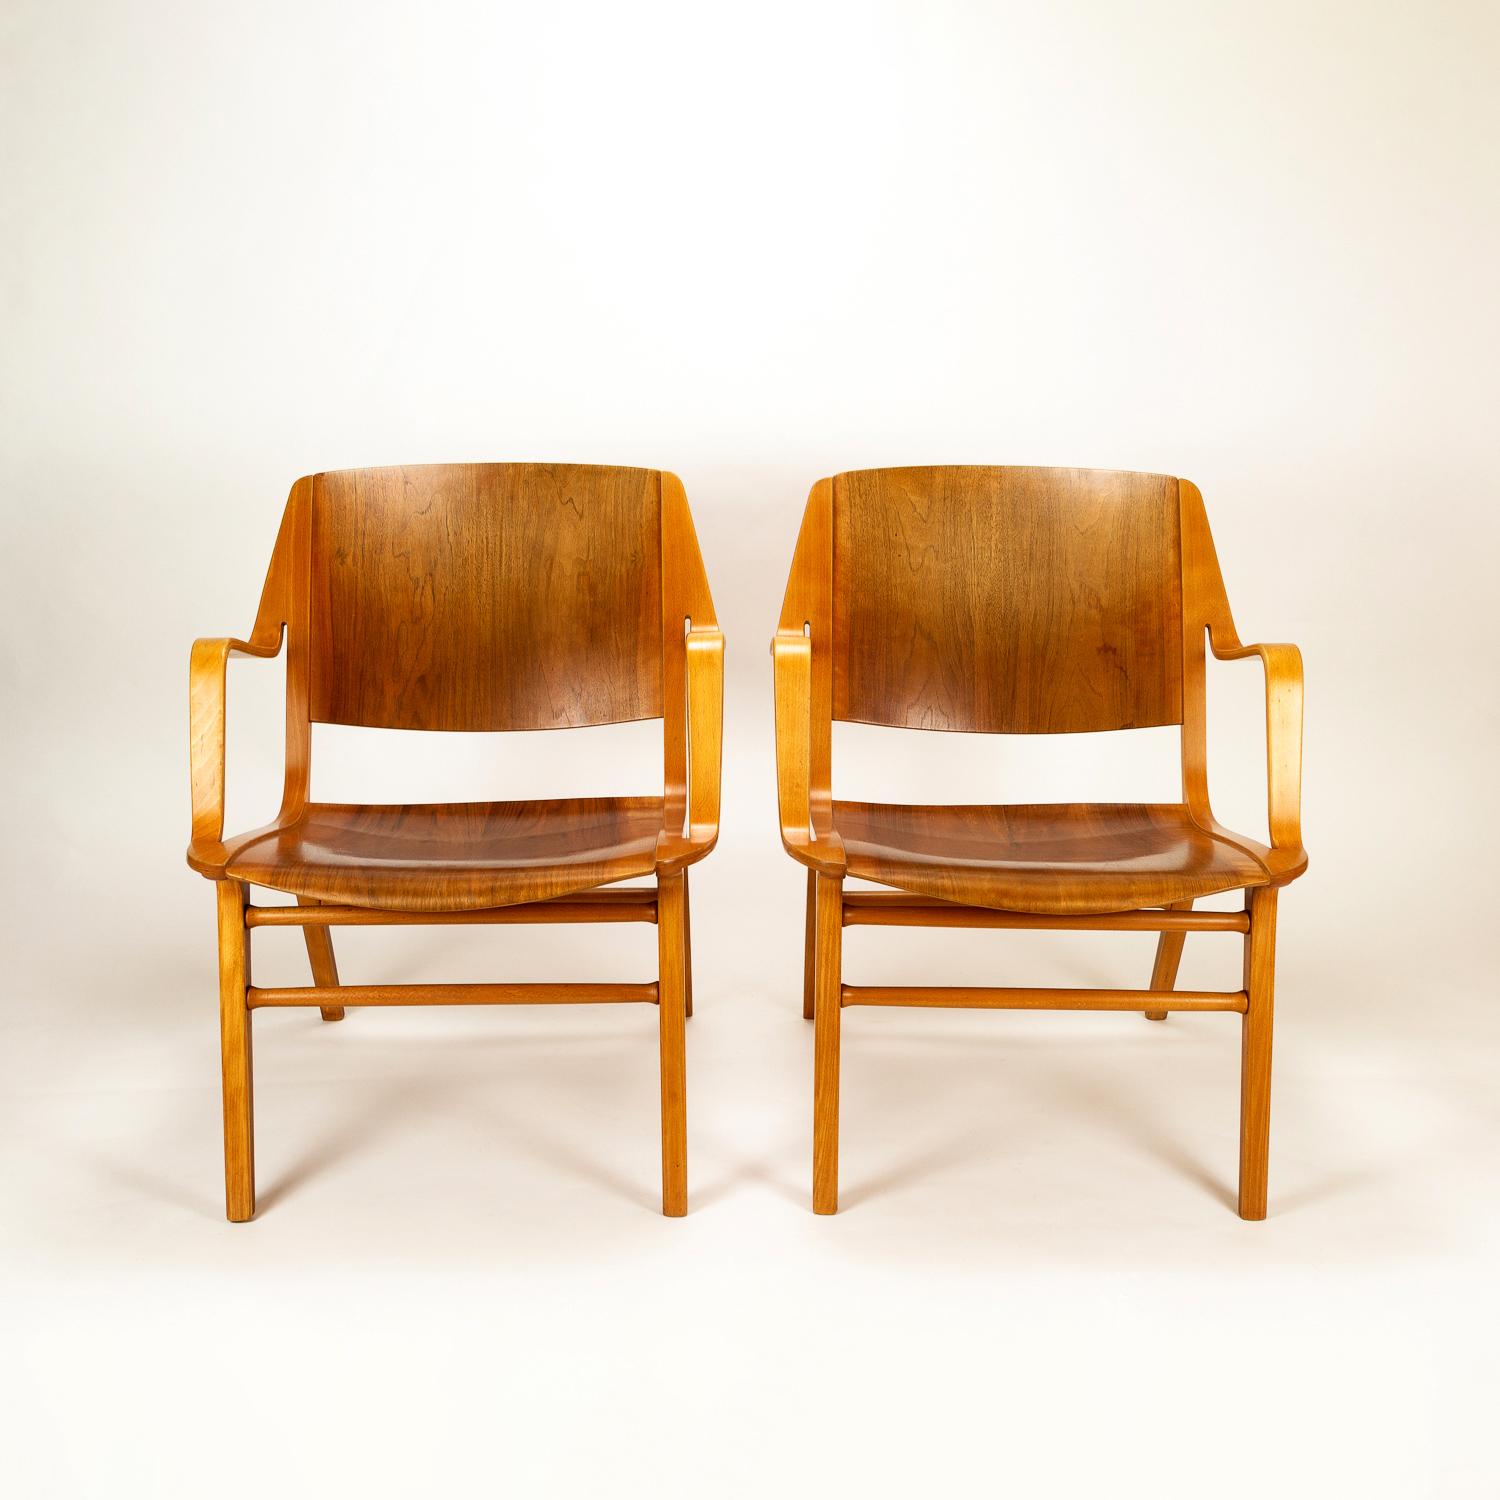 A pair of midcentury AX chairs in moulded and laminated teak and beech. Designed in 1947 by Peter Hvidt and Orla Mølgaard-Nielsen and manufactured by Fritz Hansen, Denmark, 1950s. Excellent vintage condition. Gently restored.